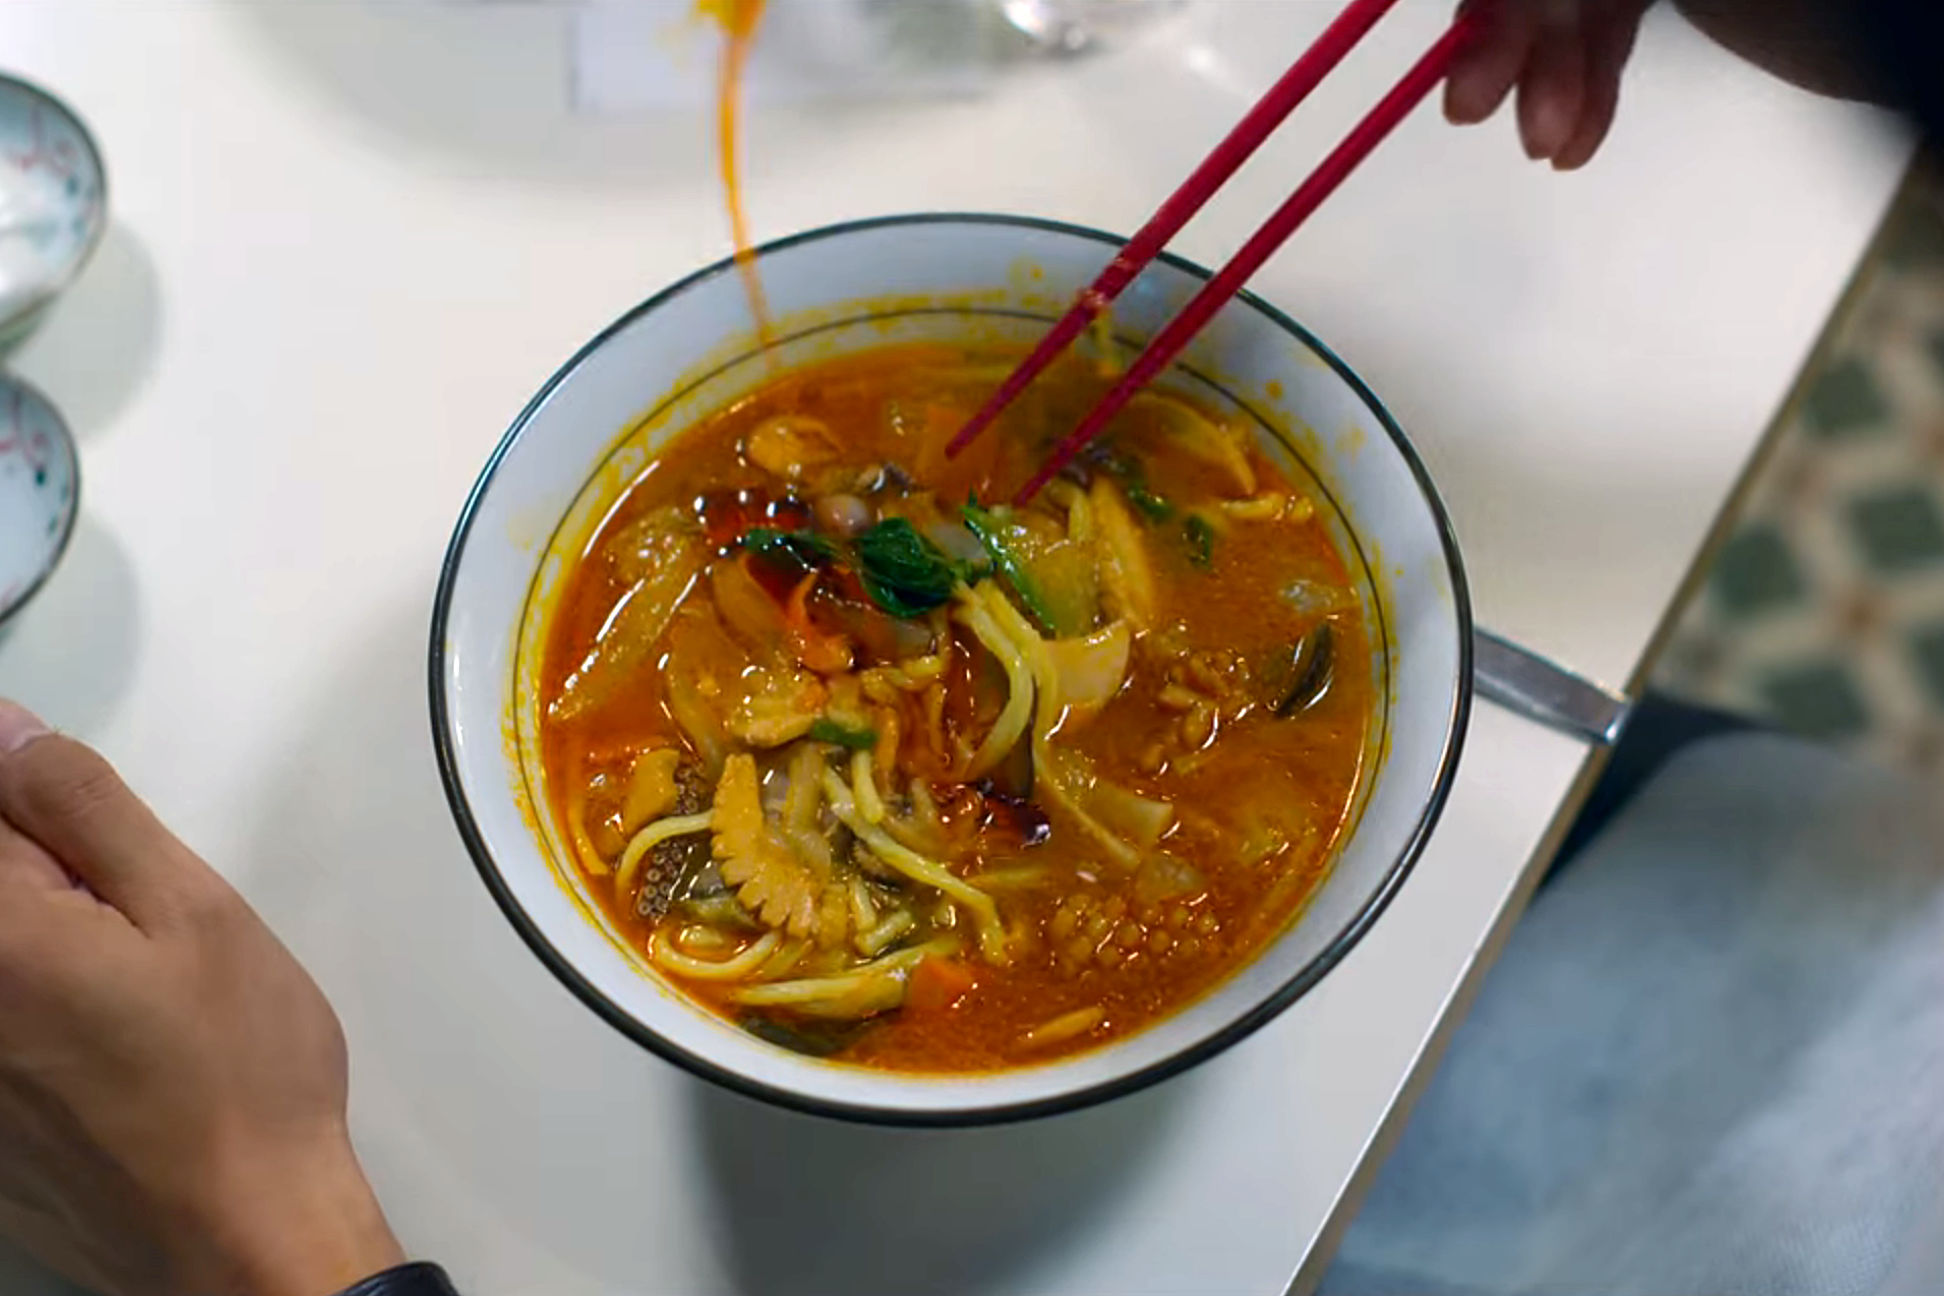 Spicy bowl of seafood noodle soup, seen in the kdrama, Vincenzo